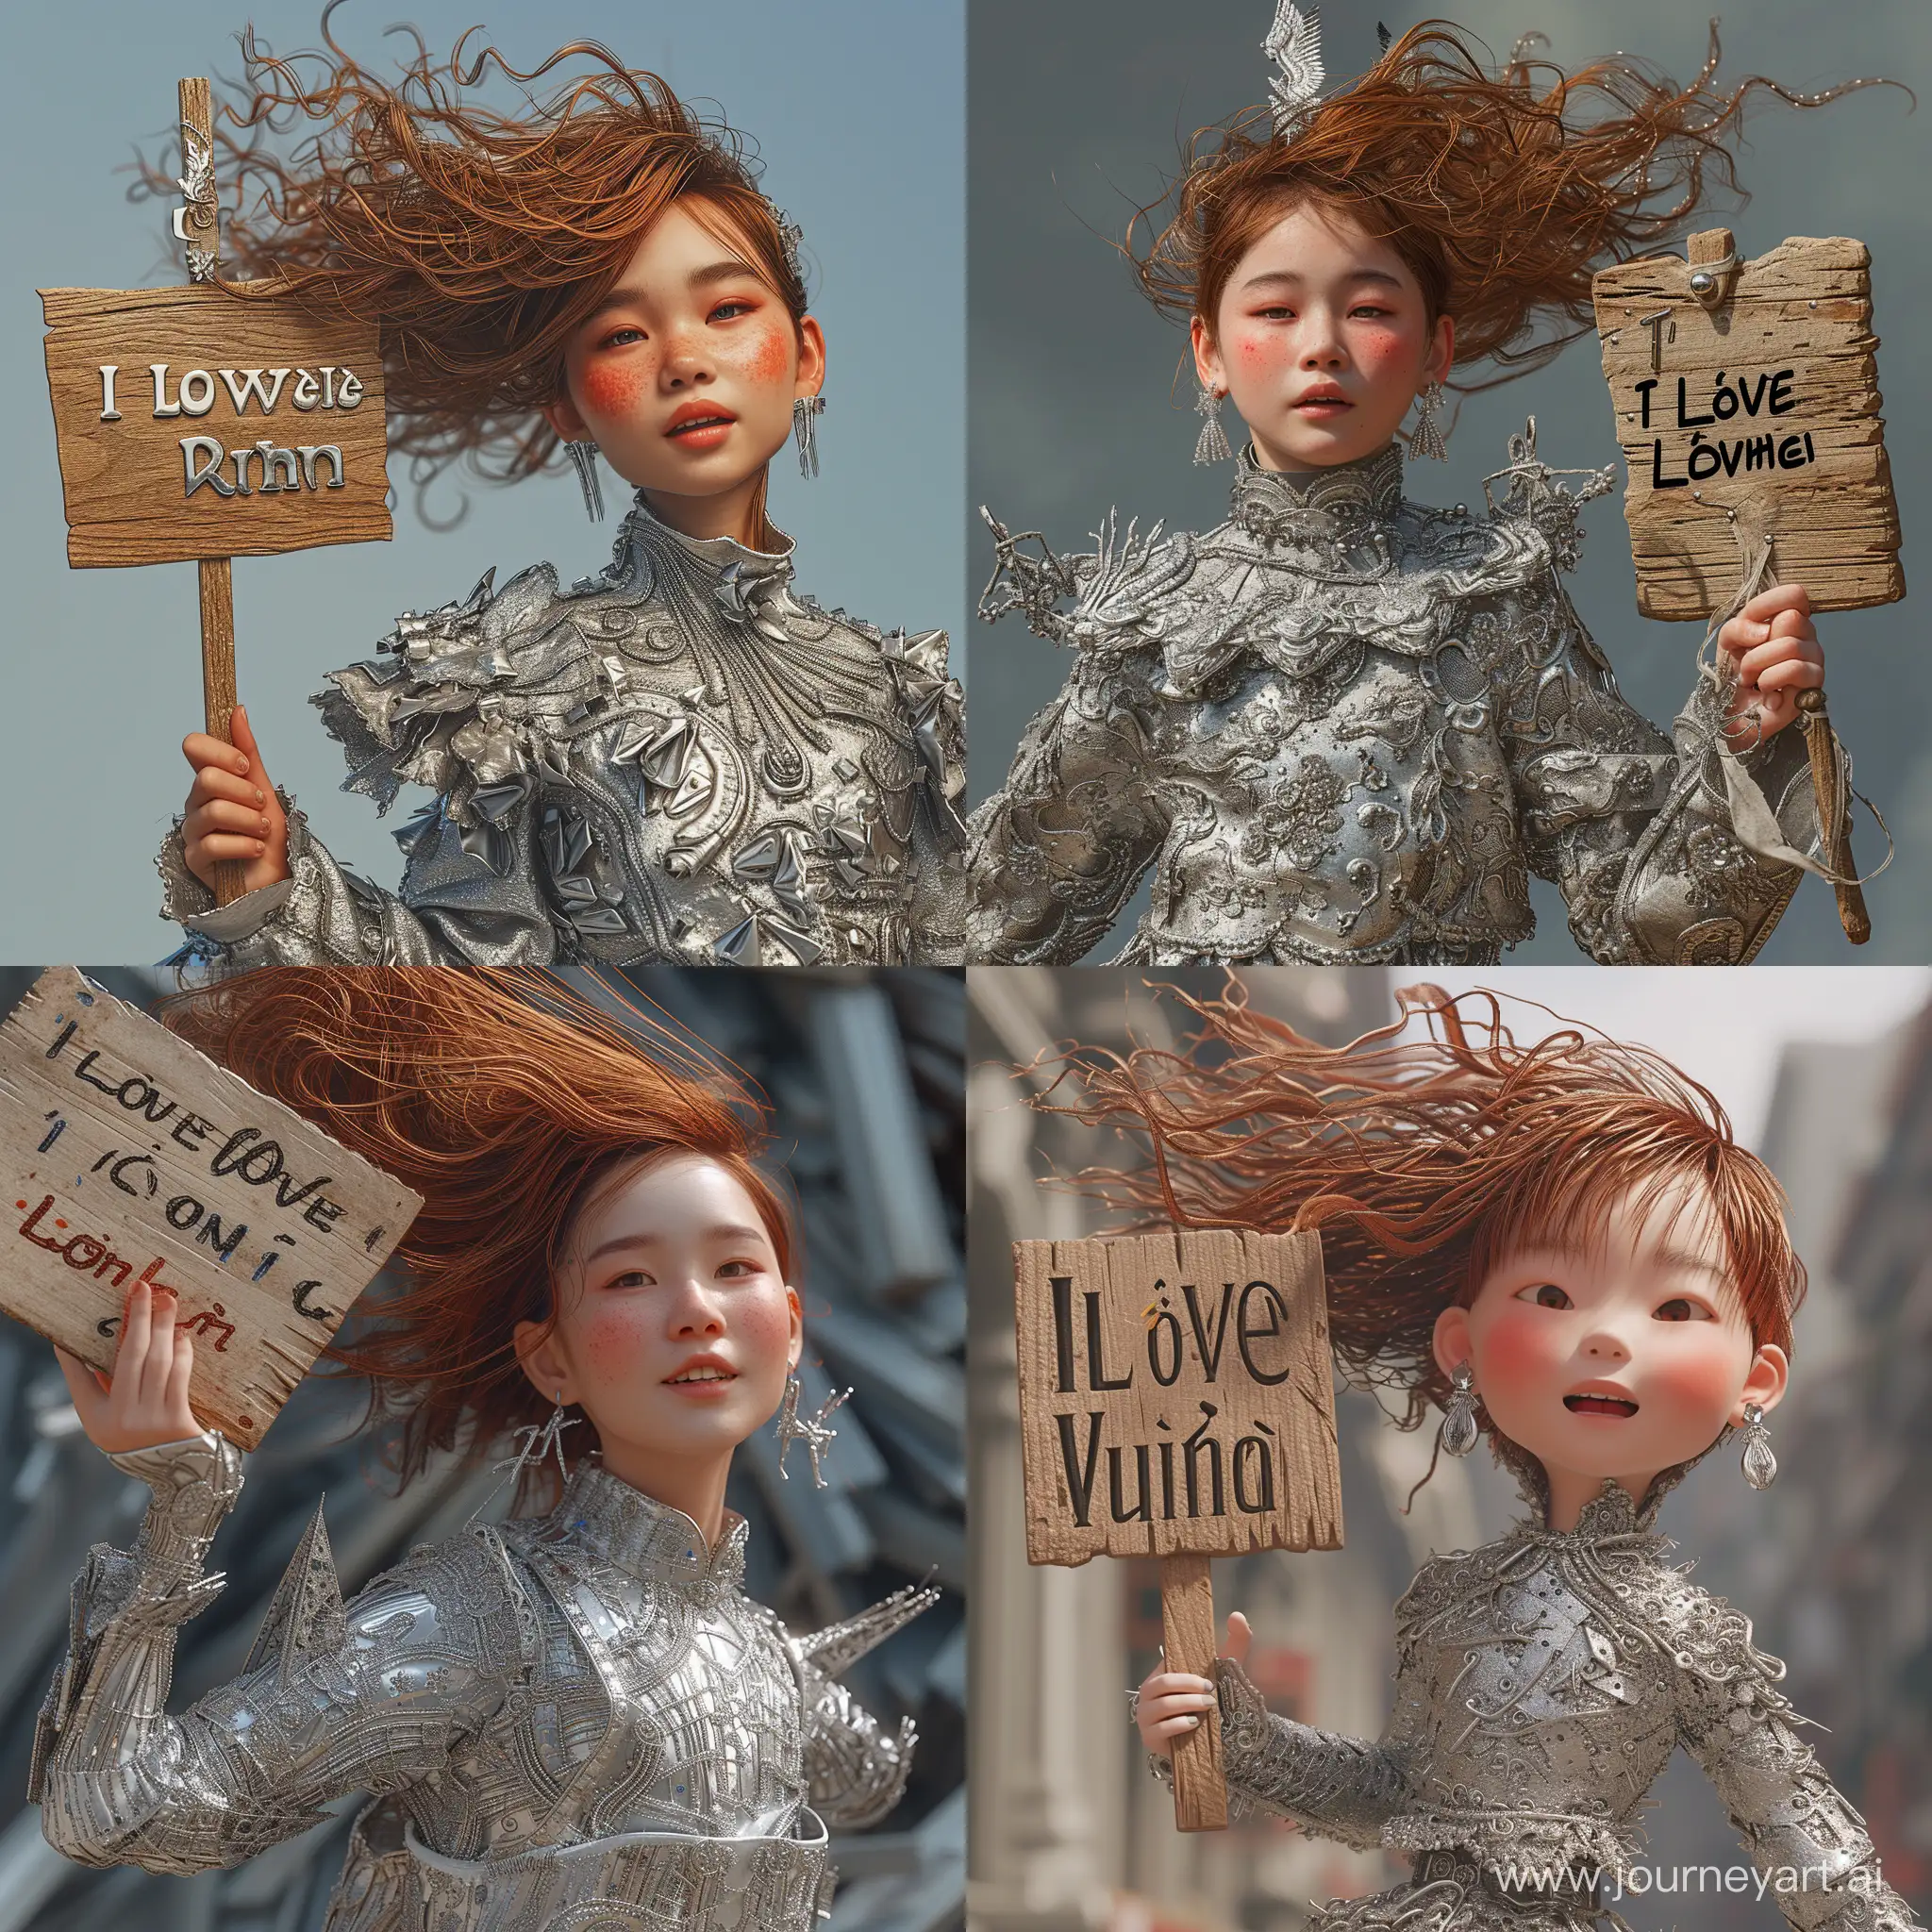 create for me a portrait image of a 19 year old Asian girl, rosy cheeks, reddish brown hair flying randomly, silver earrings, she wears a silver metal outfit, meticulously detailed like like embroidery, the hand holds a wooden sign displaying the words: "I love Vietnam".